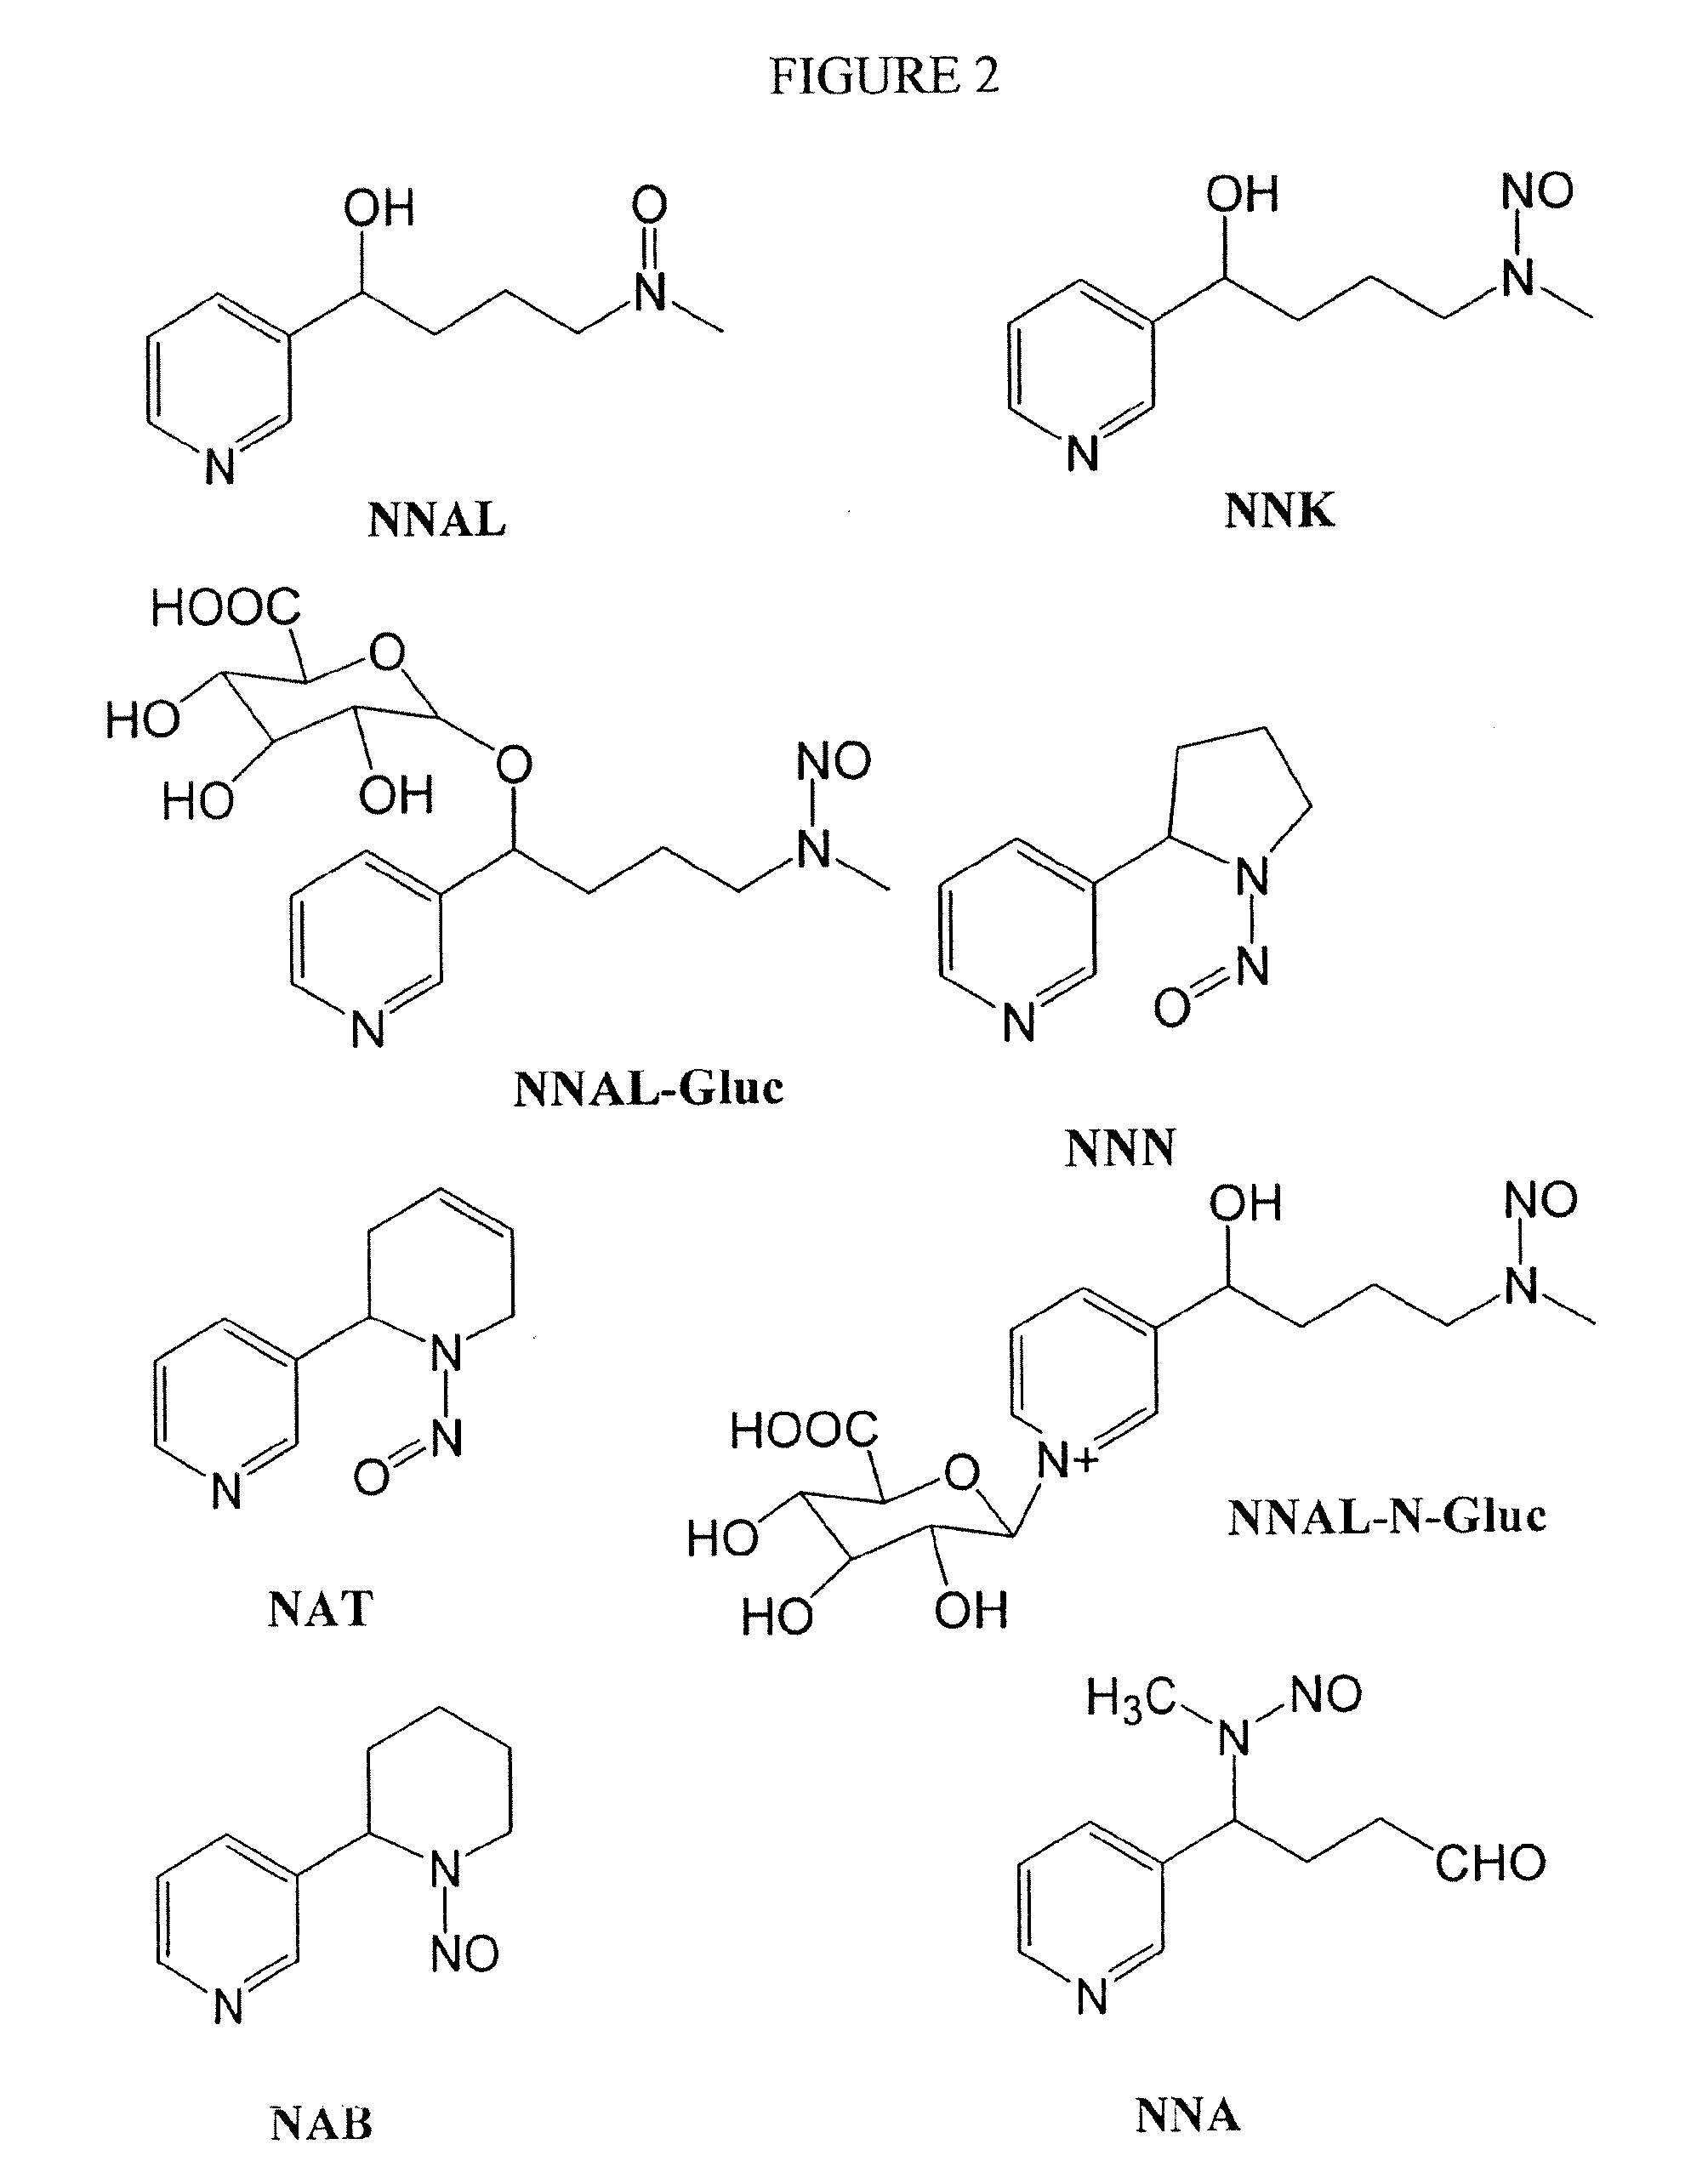 Molecularly Imprinted Polymers Selective for Tobacco Specific Nitrosamines and Methods of Using the Same